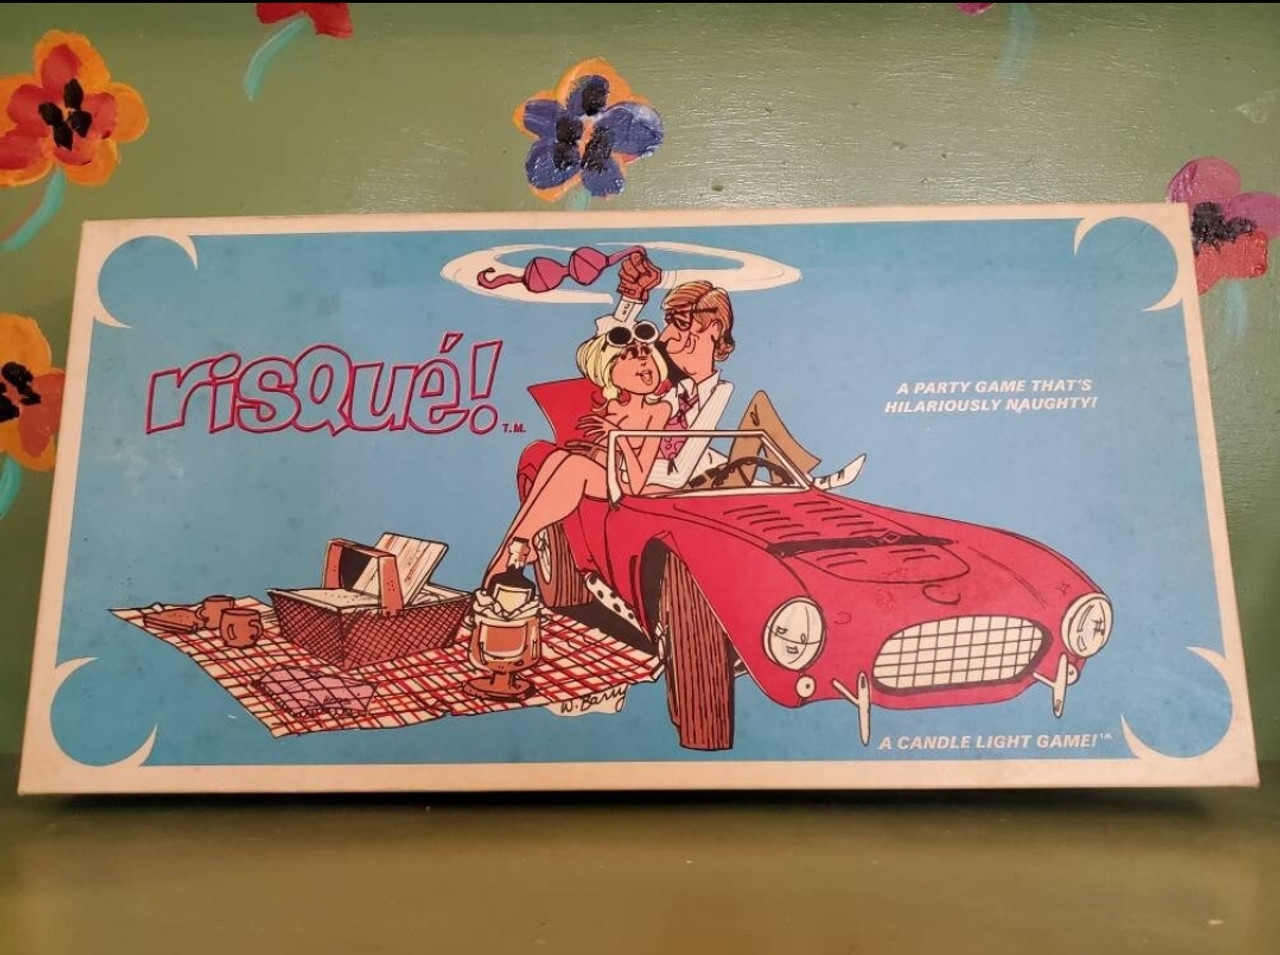 Vintage Risque Board Game Mid Century Moderation pic